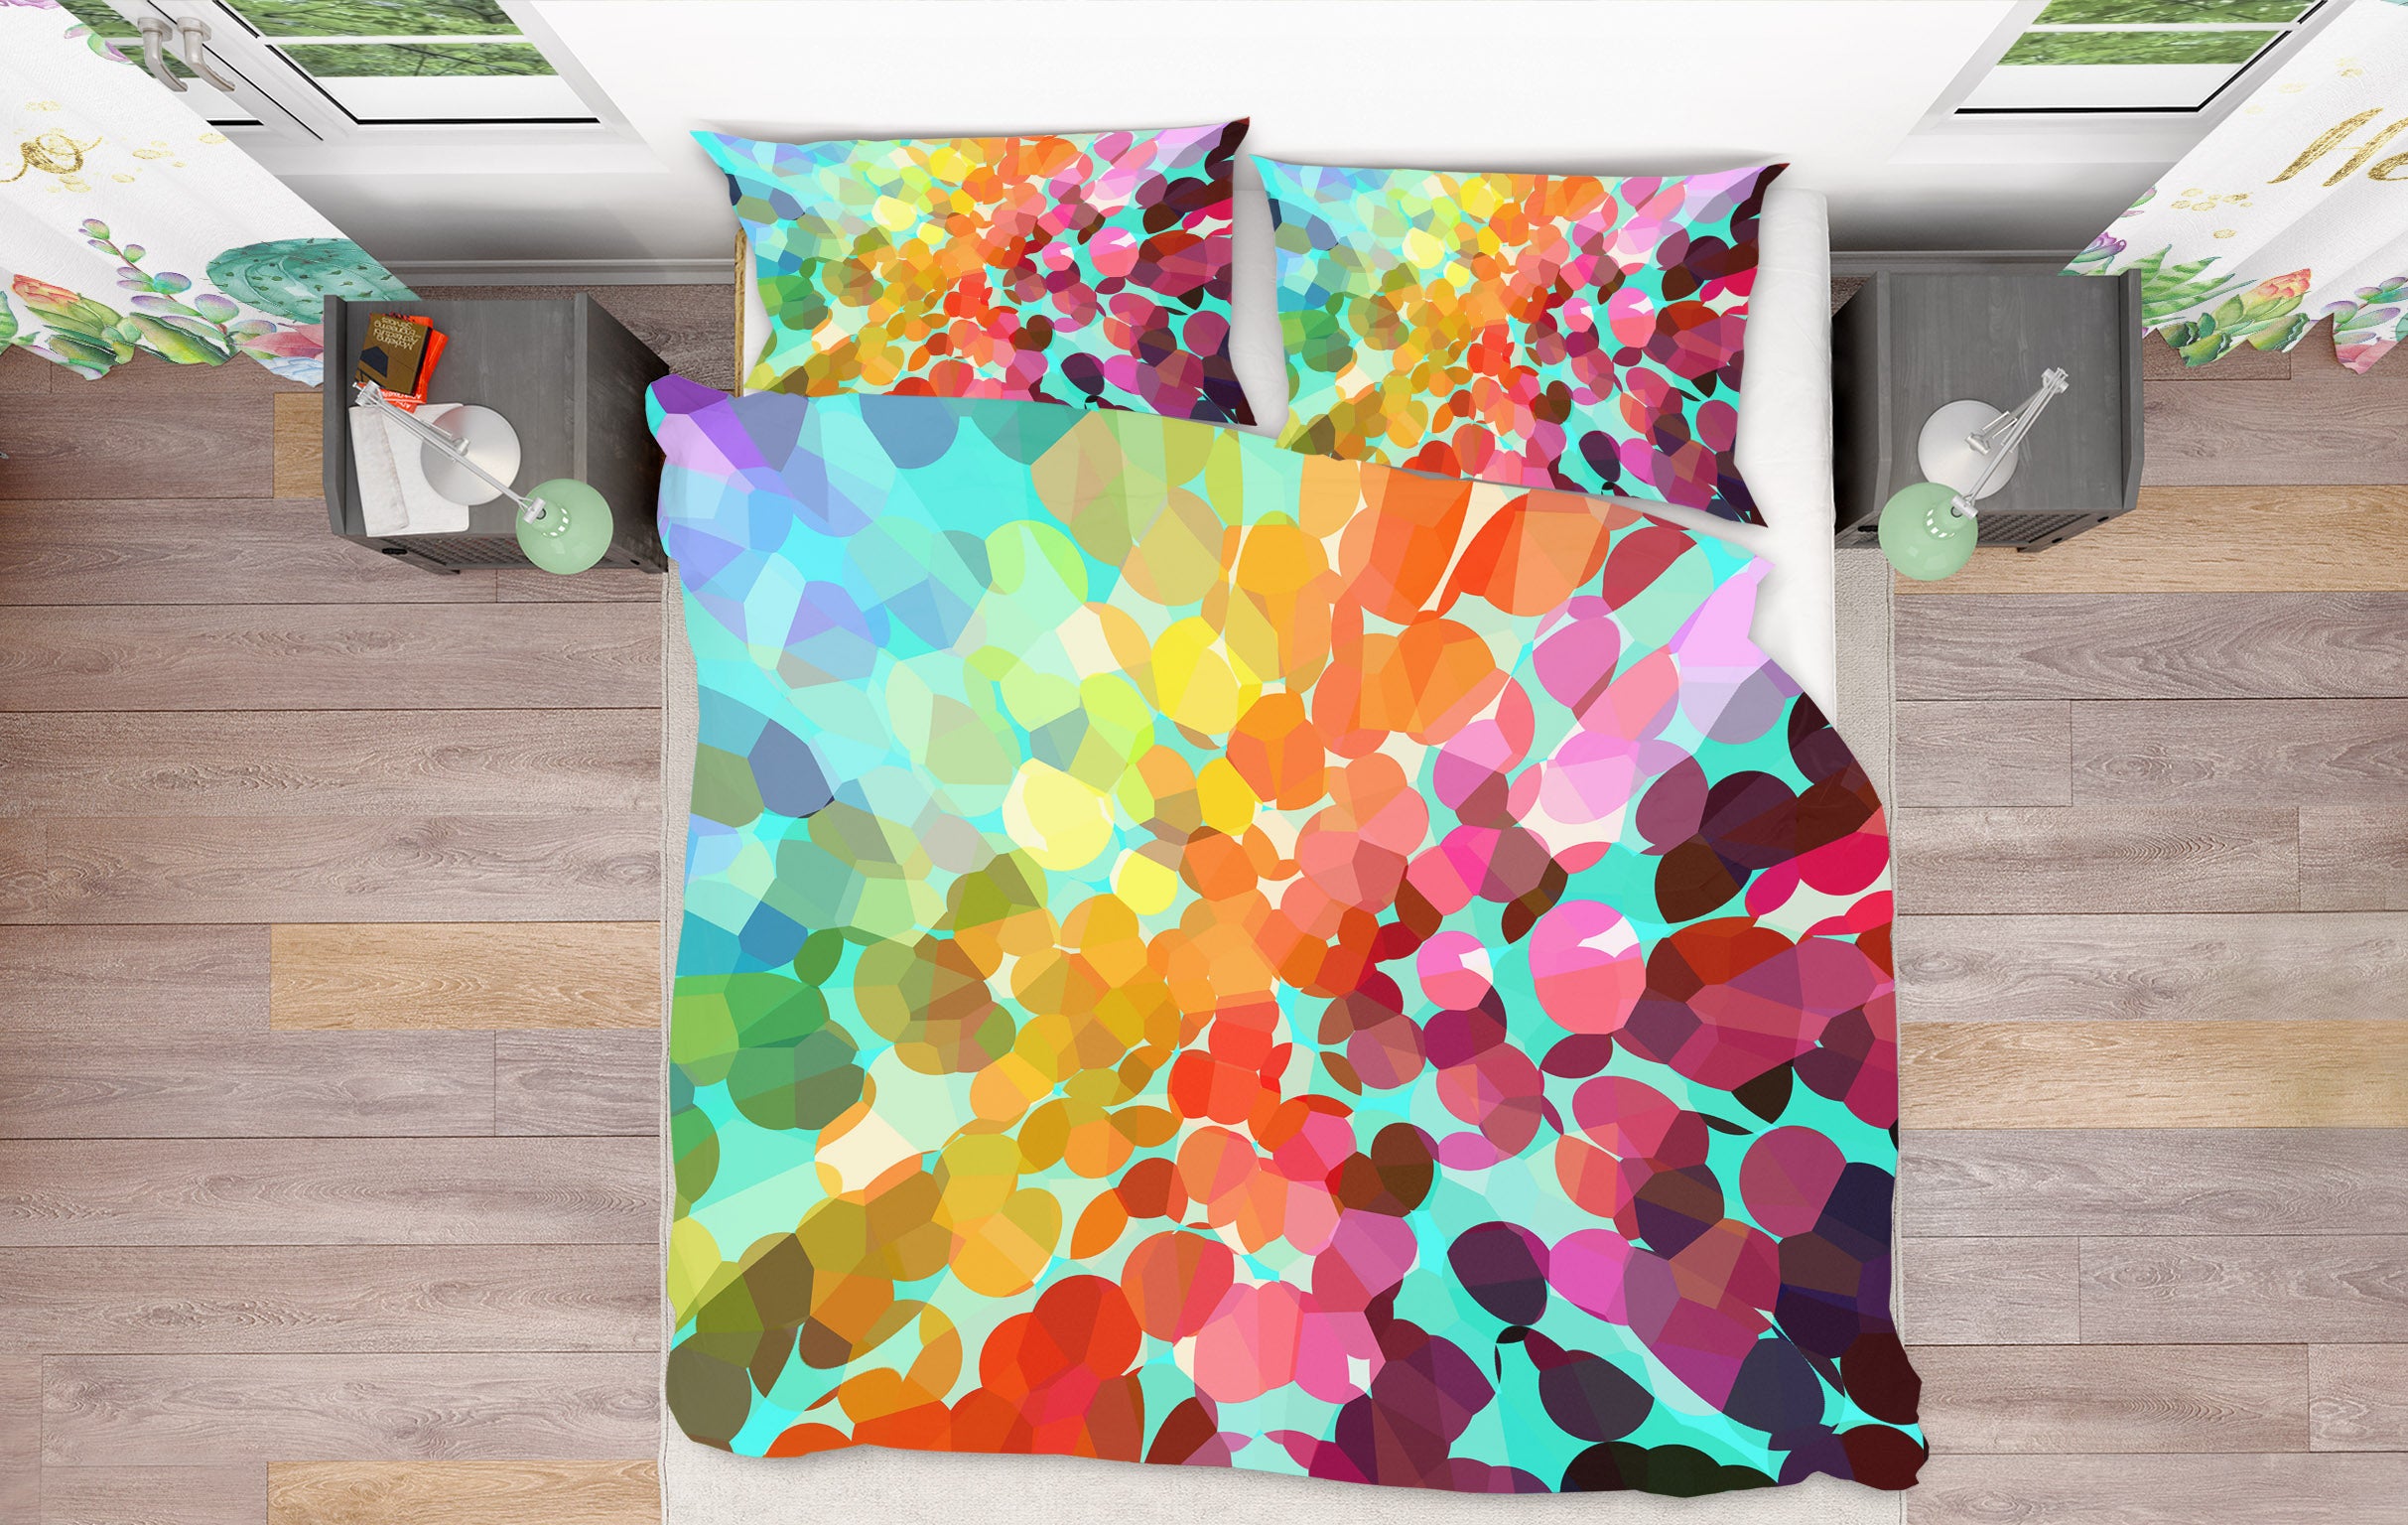 3D Colorful Pattern 70004 Shandra Smith Bedding Bed Pillowcases Quilt